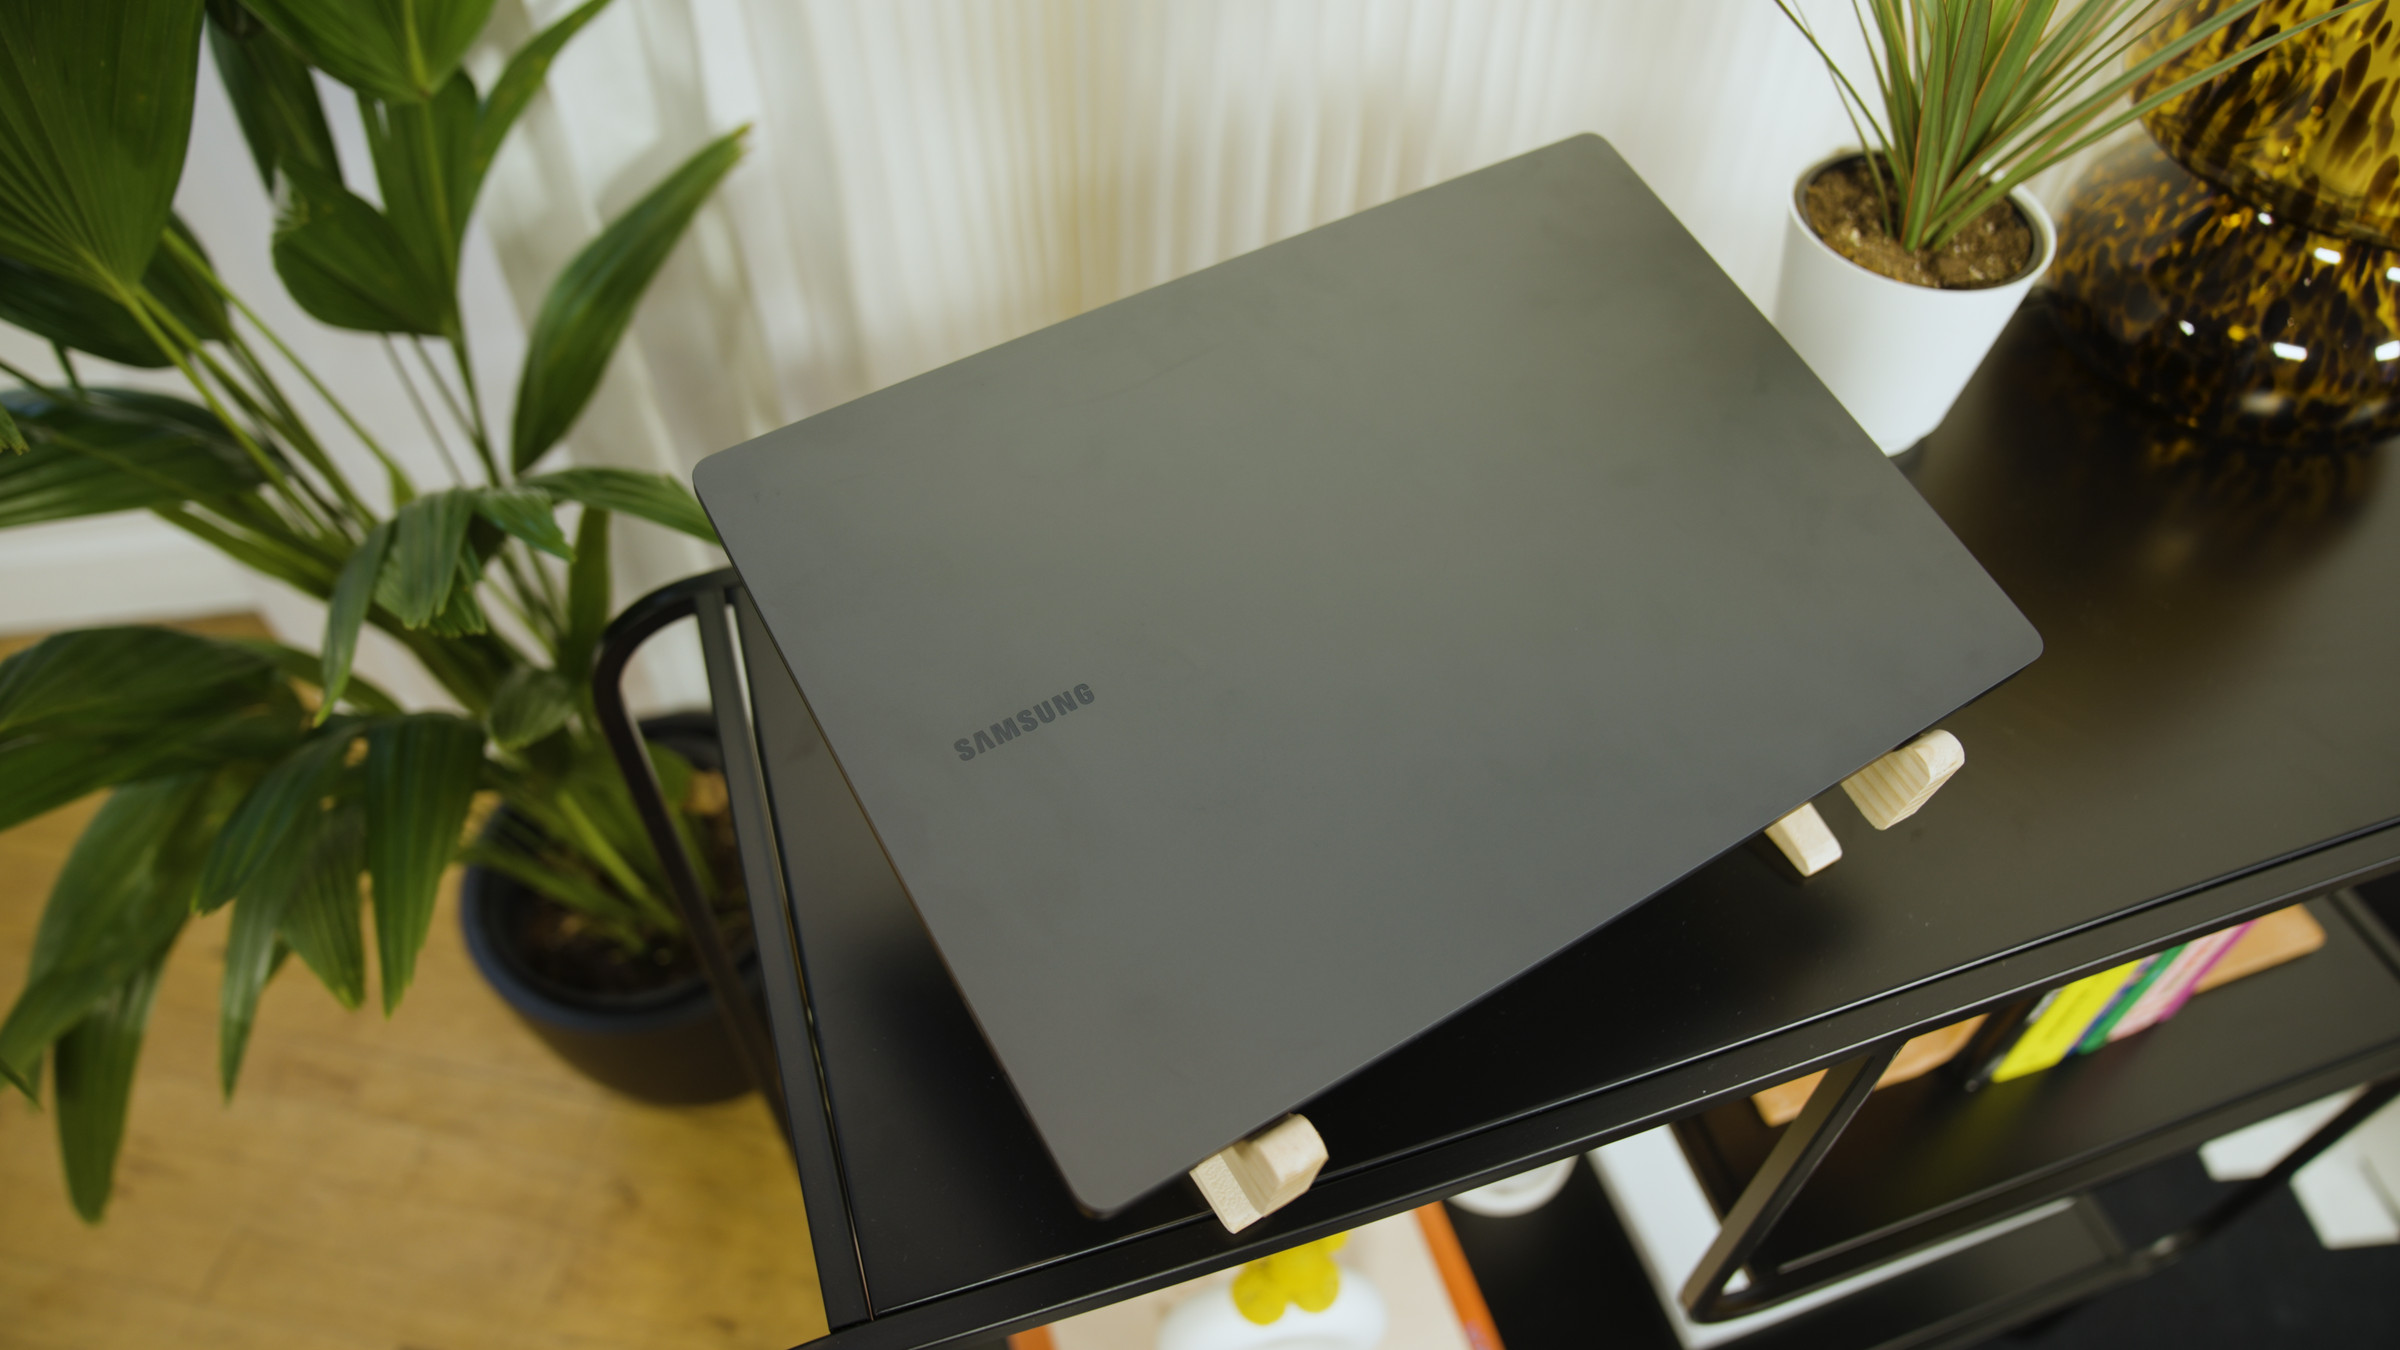 Samsung Galaxy Book 3 Ultra cover seen from above with houseplants on either side.